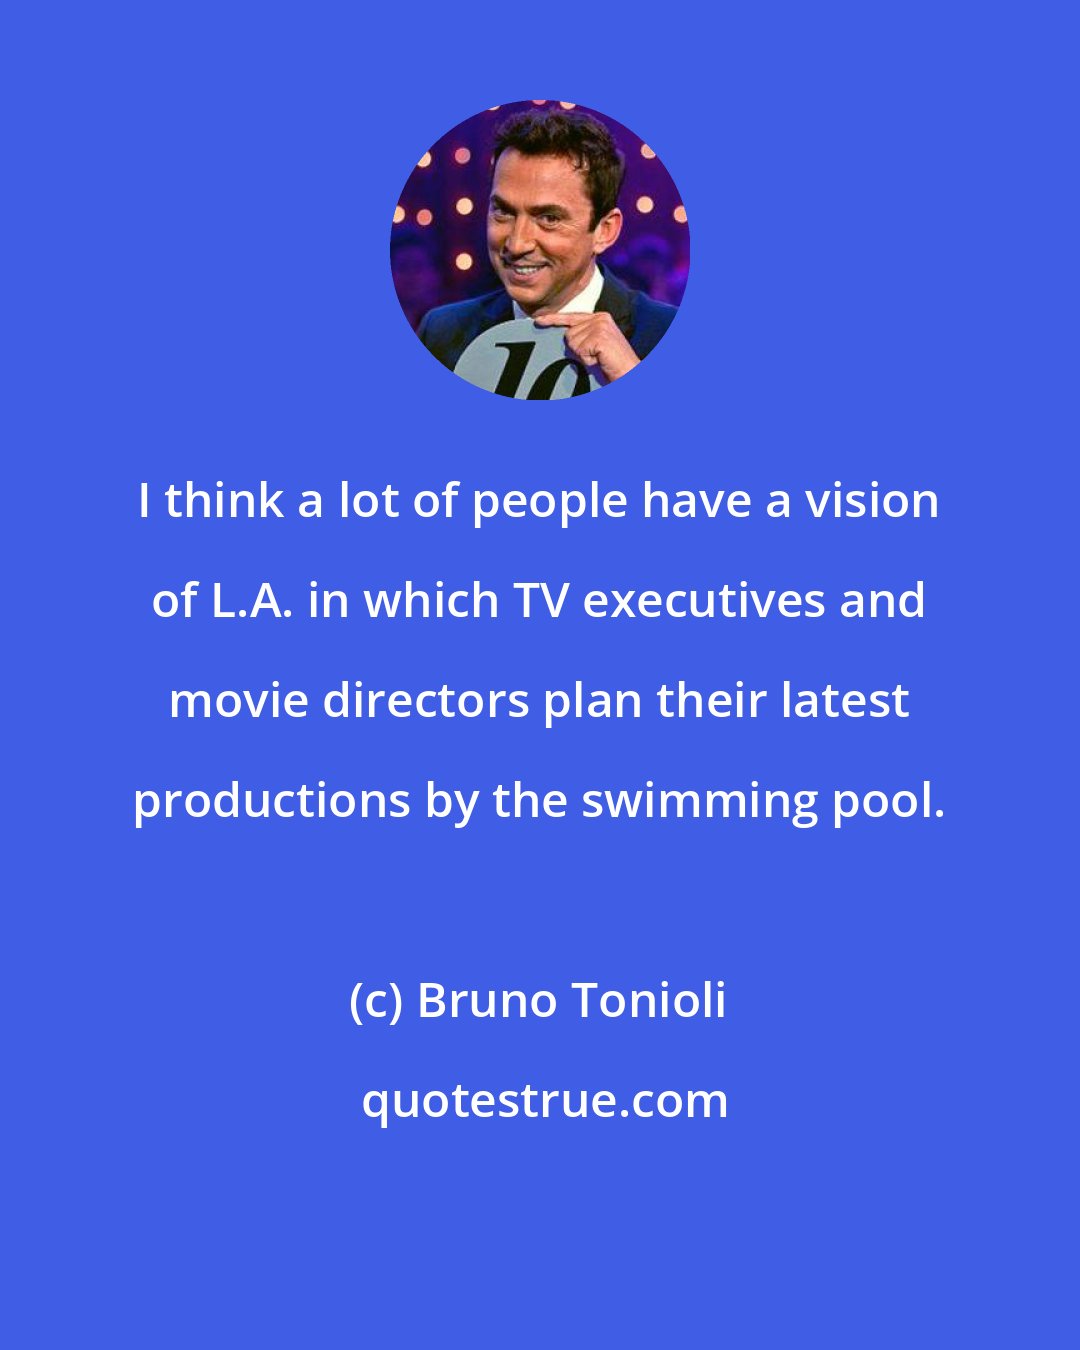 Bruno Tonioli: I think a lot of people have a vision of L.A. in which TV executives and movie directors plan their latest productions by the swimming pool.